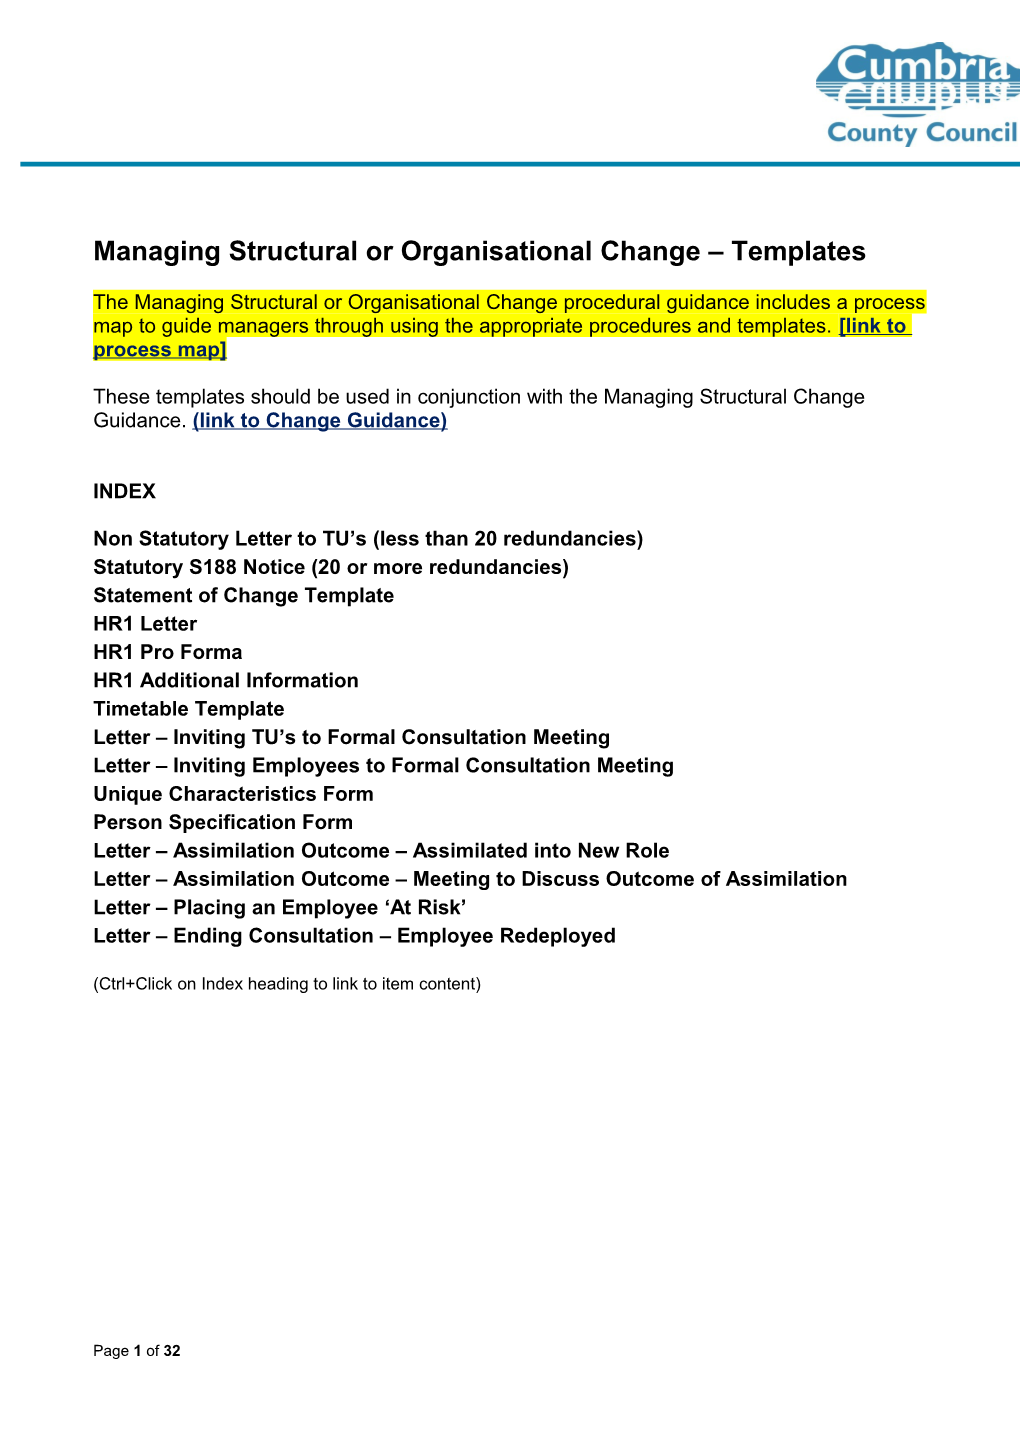 Combined Management of Change Documents